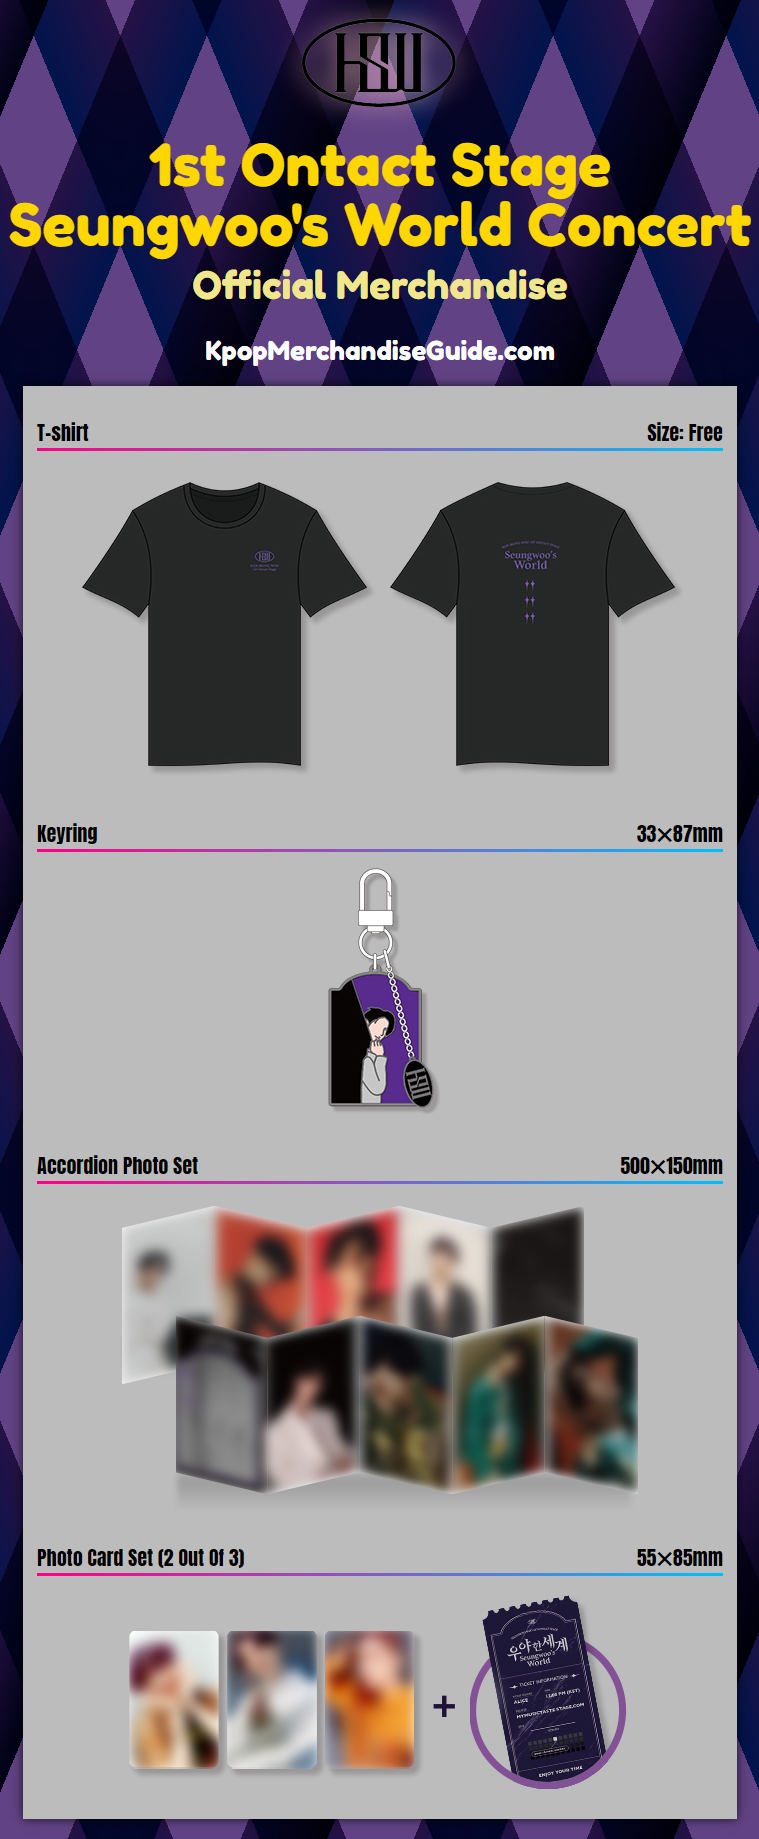 Han Seung Woo 1st Ontact Stage Seungwoo's World Concert Merchandise